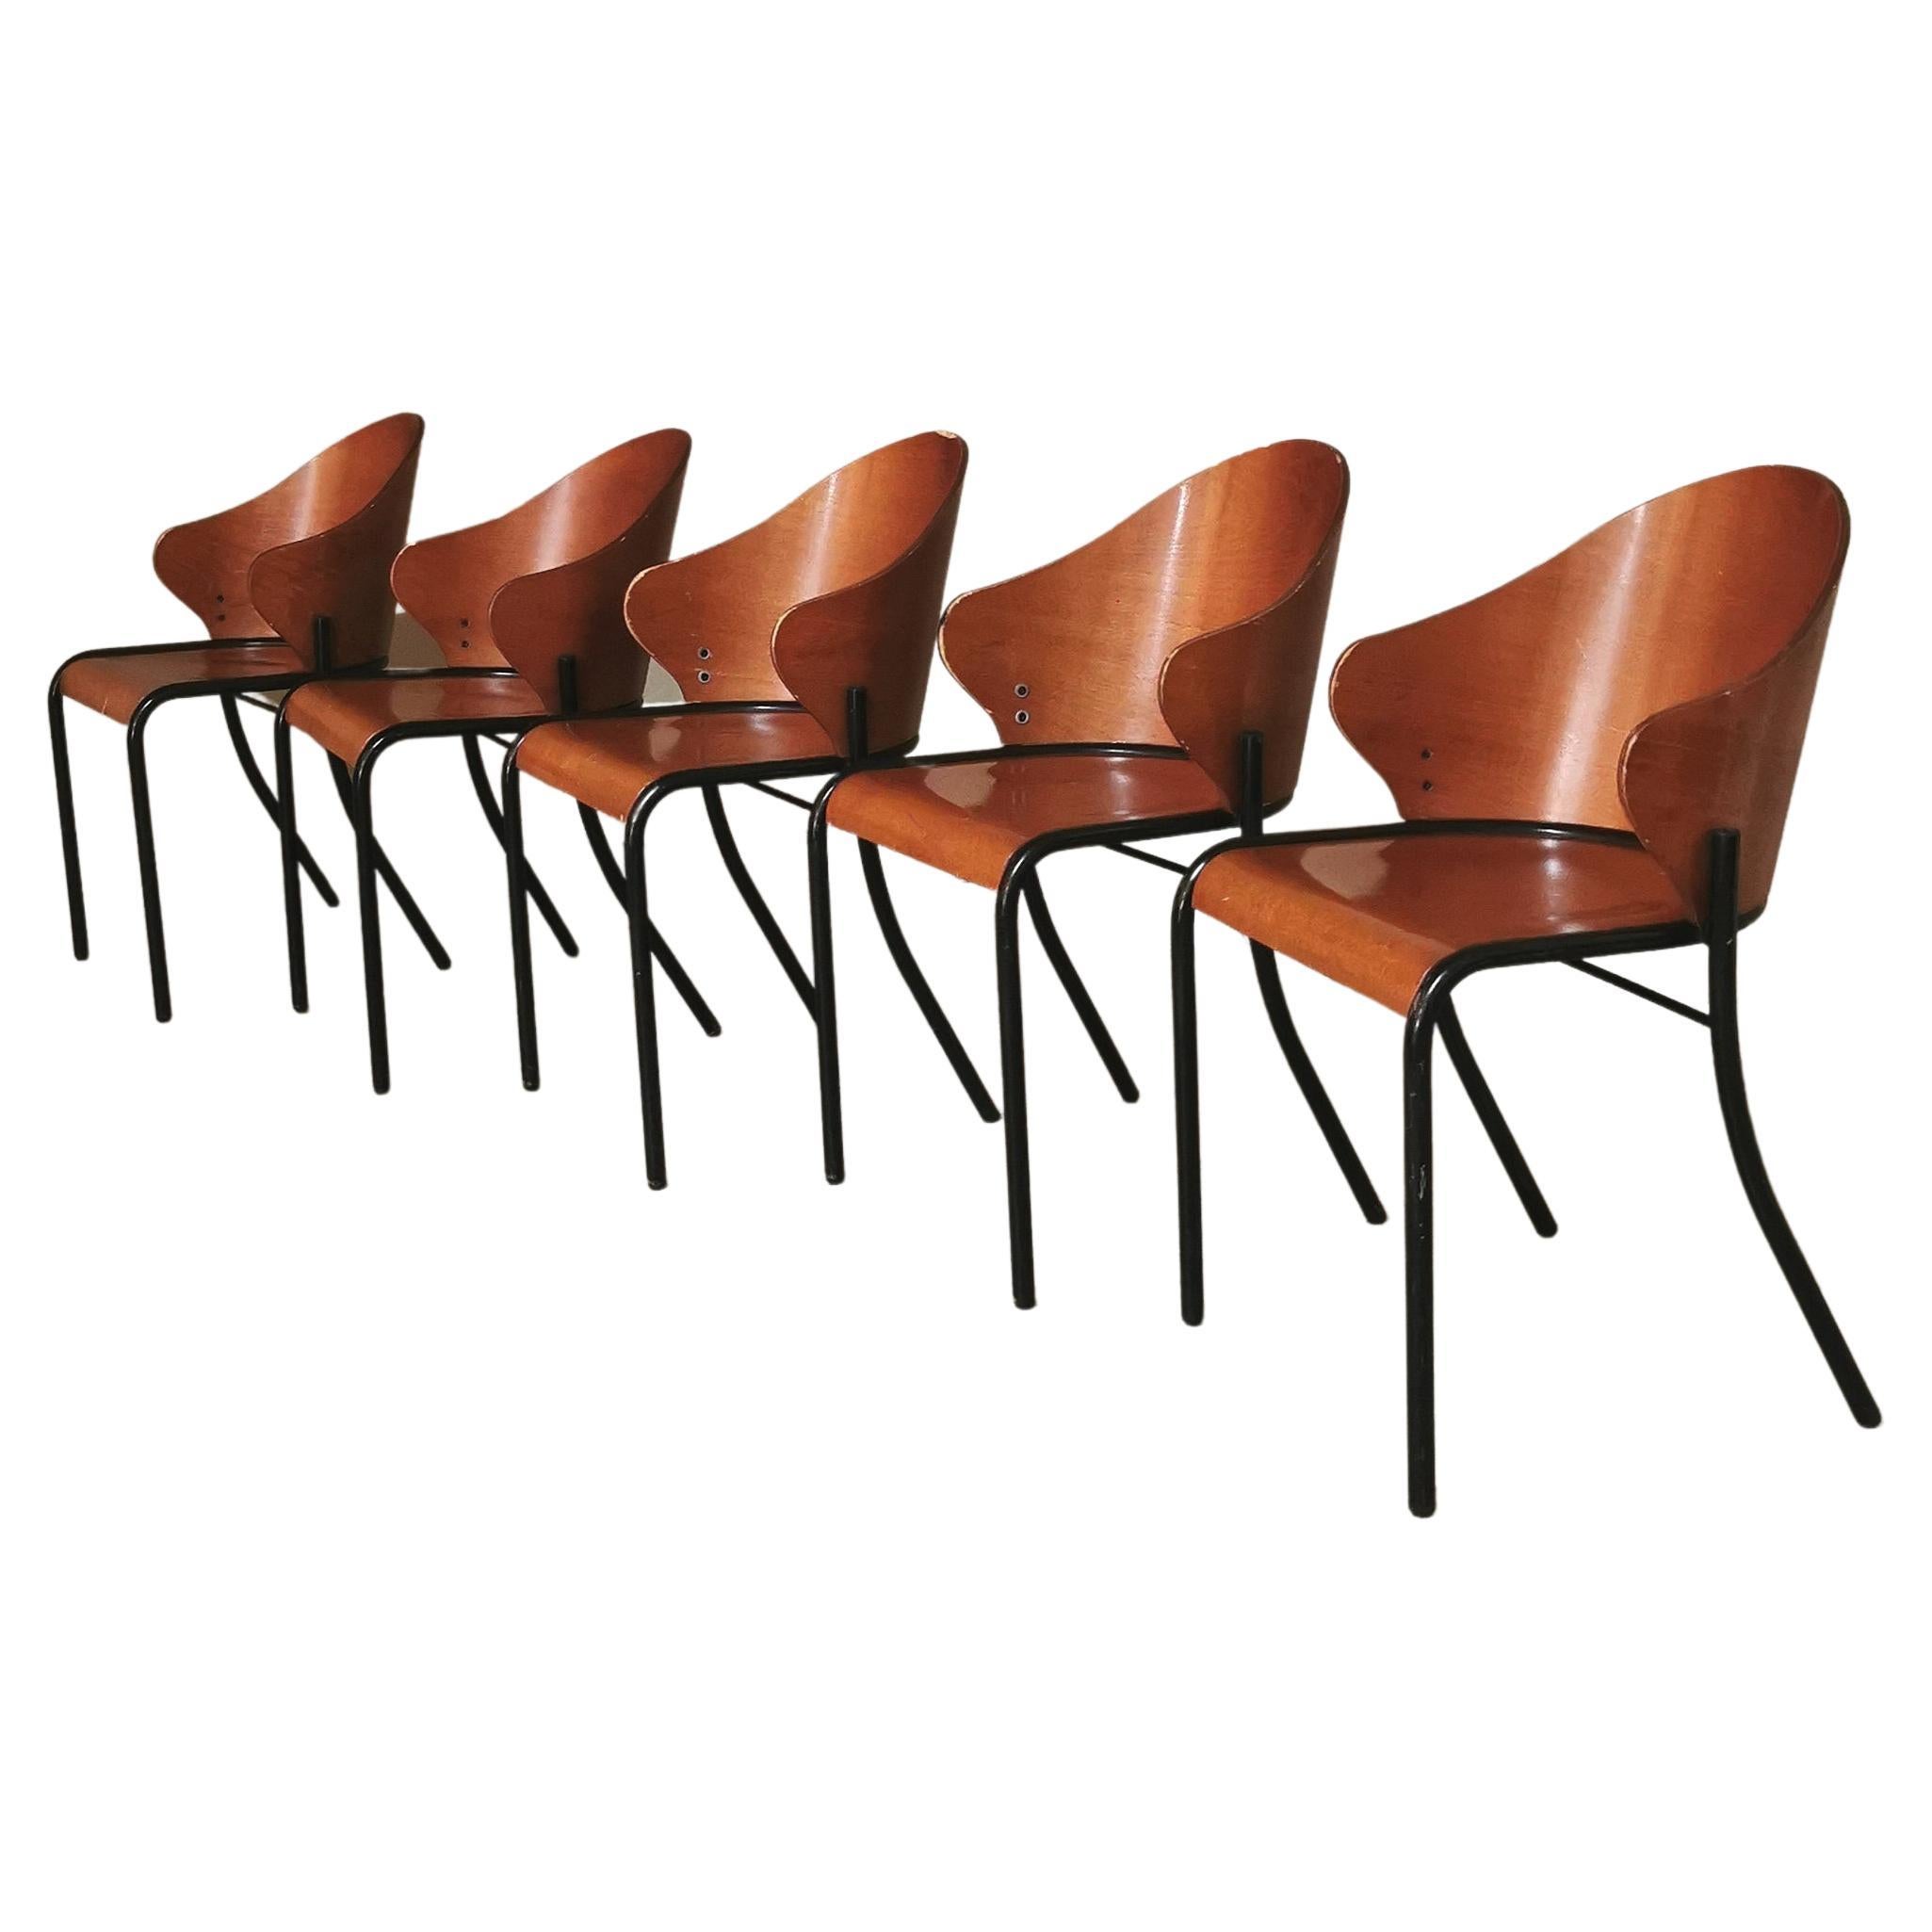 Set of 9 dining chairs in the style of Philippe Starck with unusual shapes produced in Italy in the 1960s. The chairs have a black enamelled tubular metal frame and back legs of a particular curved shape with seat and back in curved wood.

